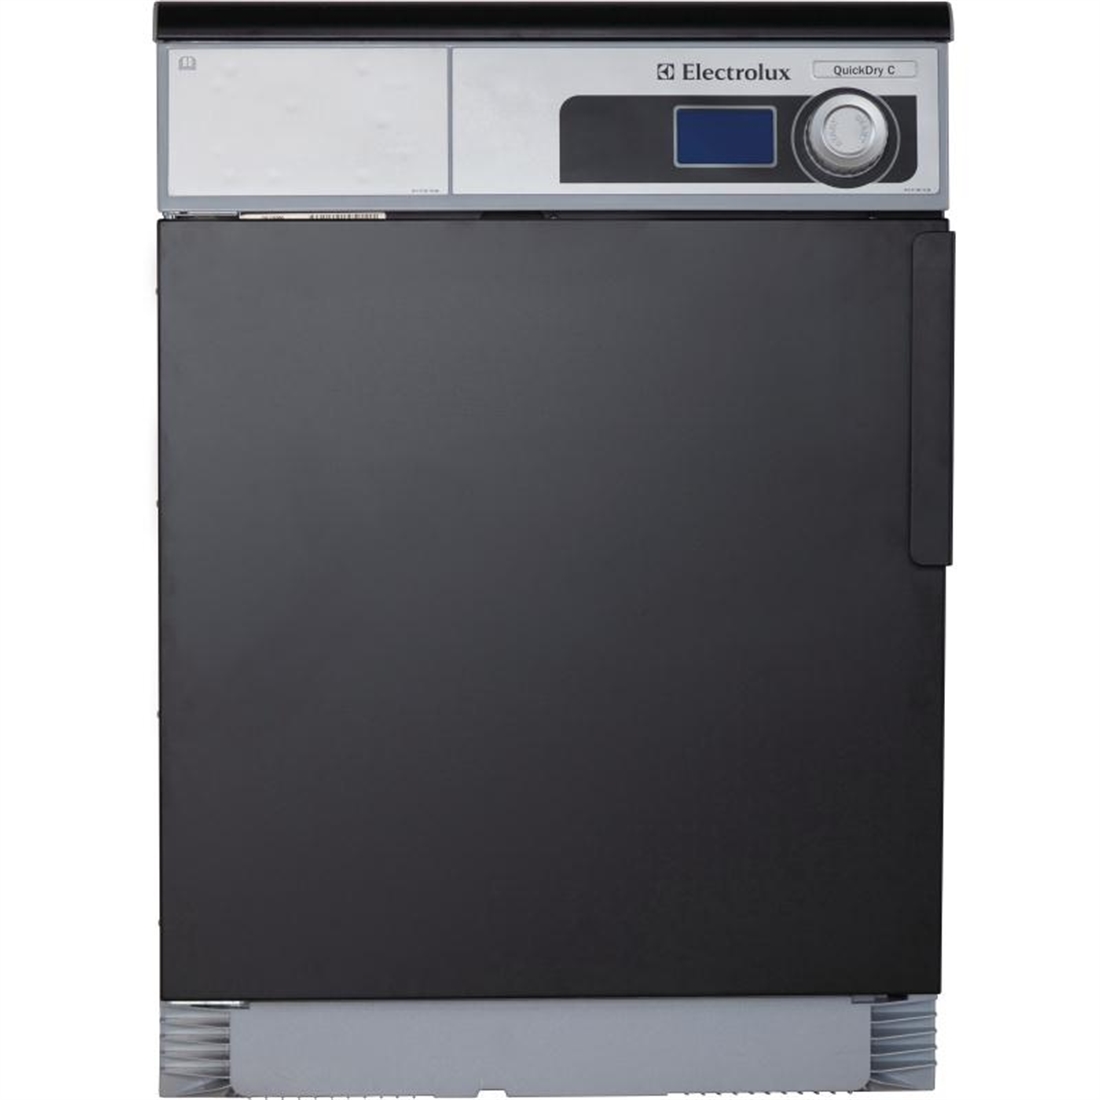 Electrolux Quickdry Vented Tumble Dryer